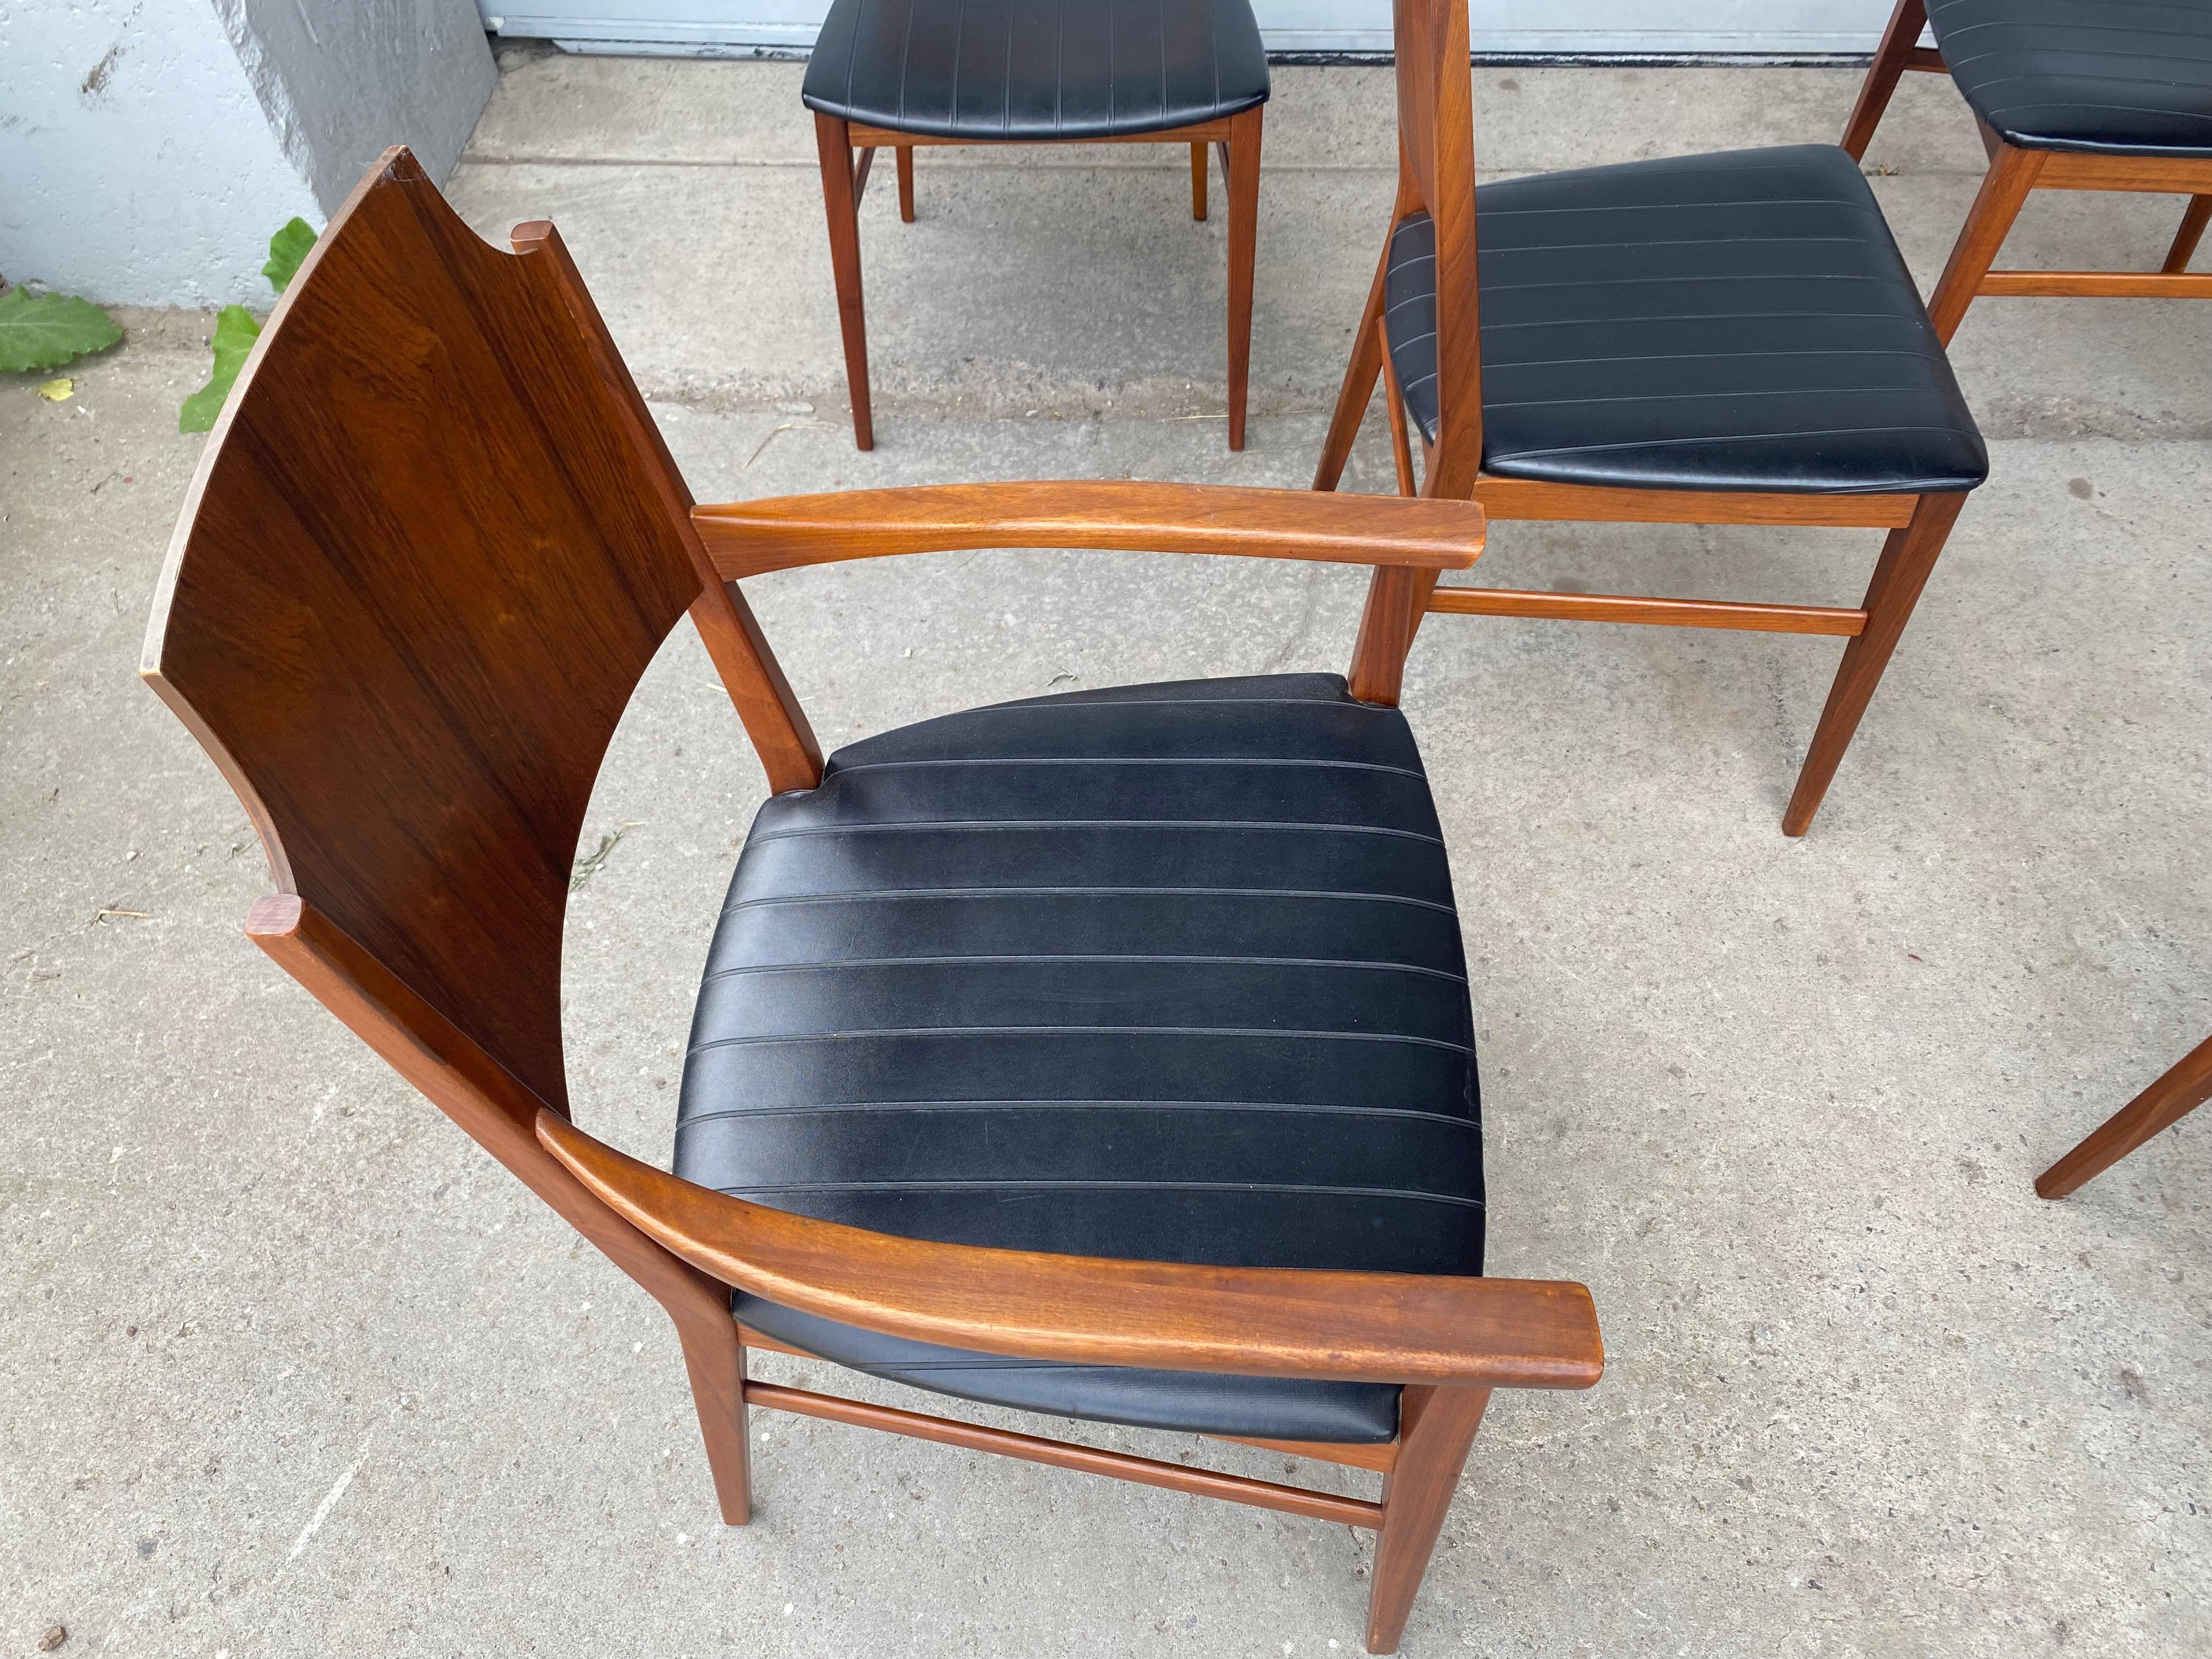 Set 6 Rosewood Dining Chairs, Paul McCobb, Delineator For Sale 1